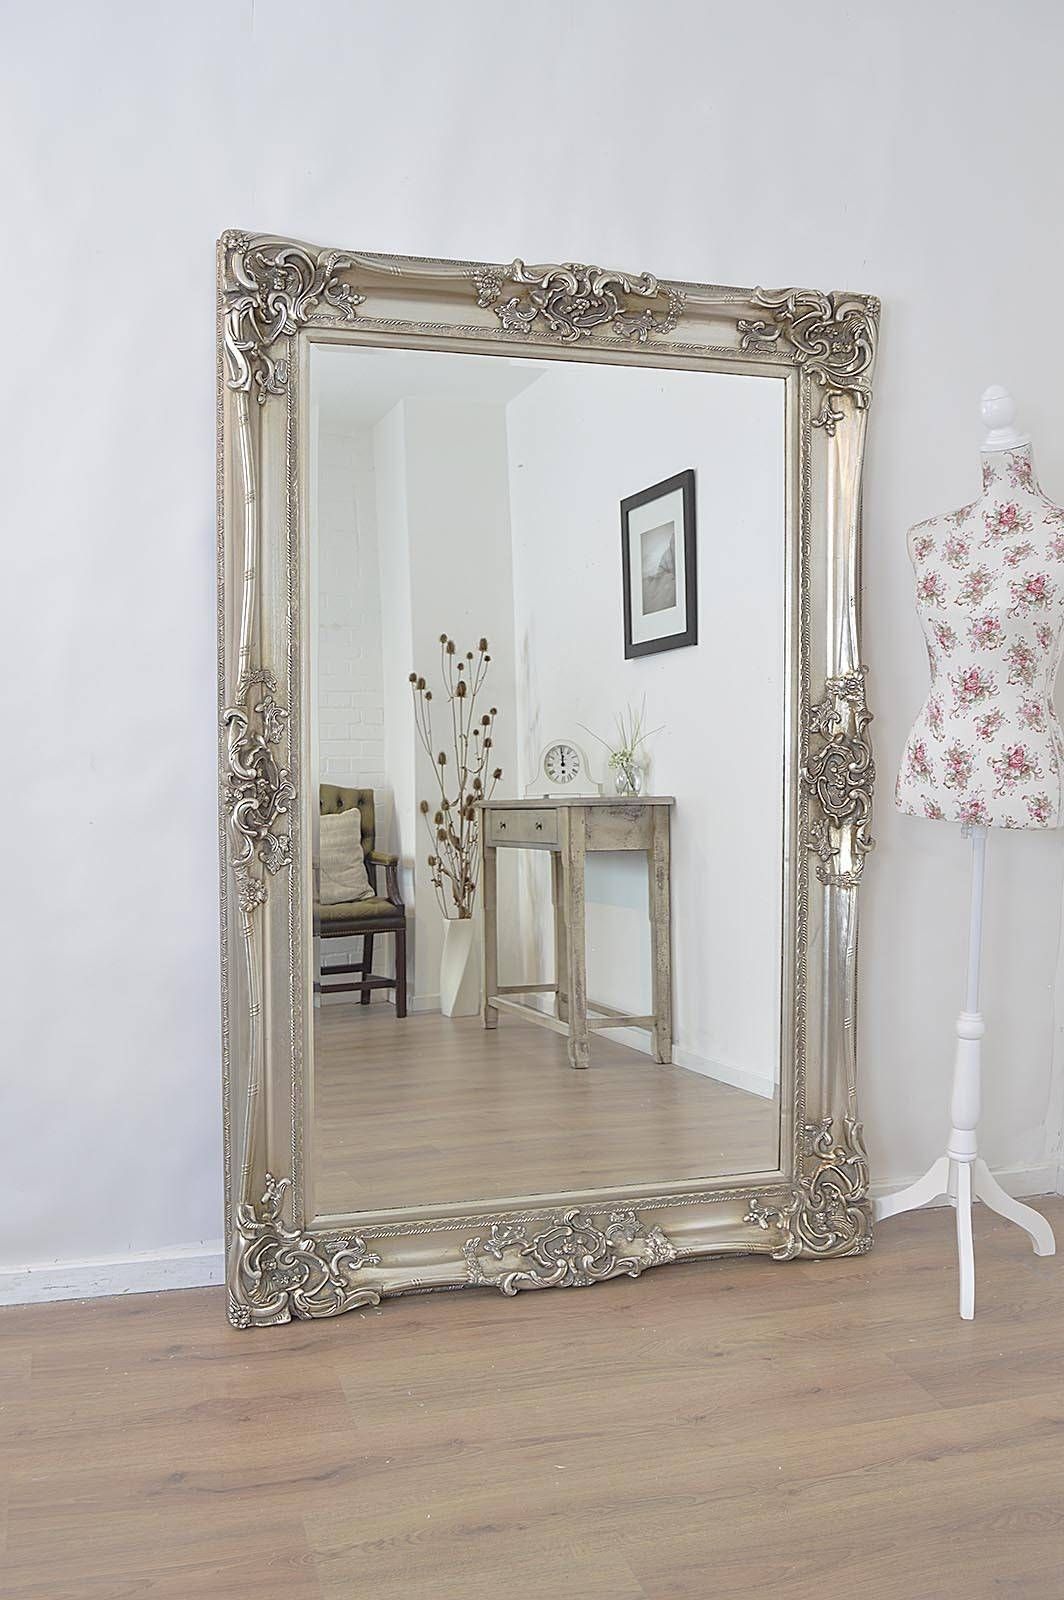 Antique Full Length Wall Mirrors Antique Wood Framed Wall Mirrors Pertaining To Antique Full Length Mirrors (View 17 of 25)